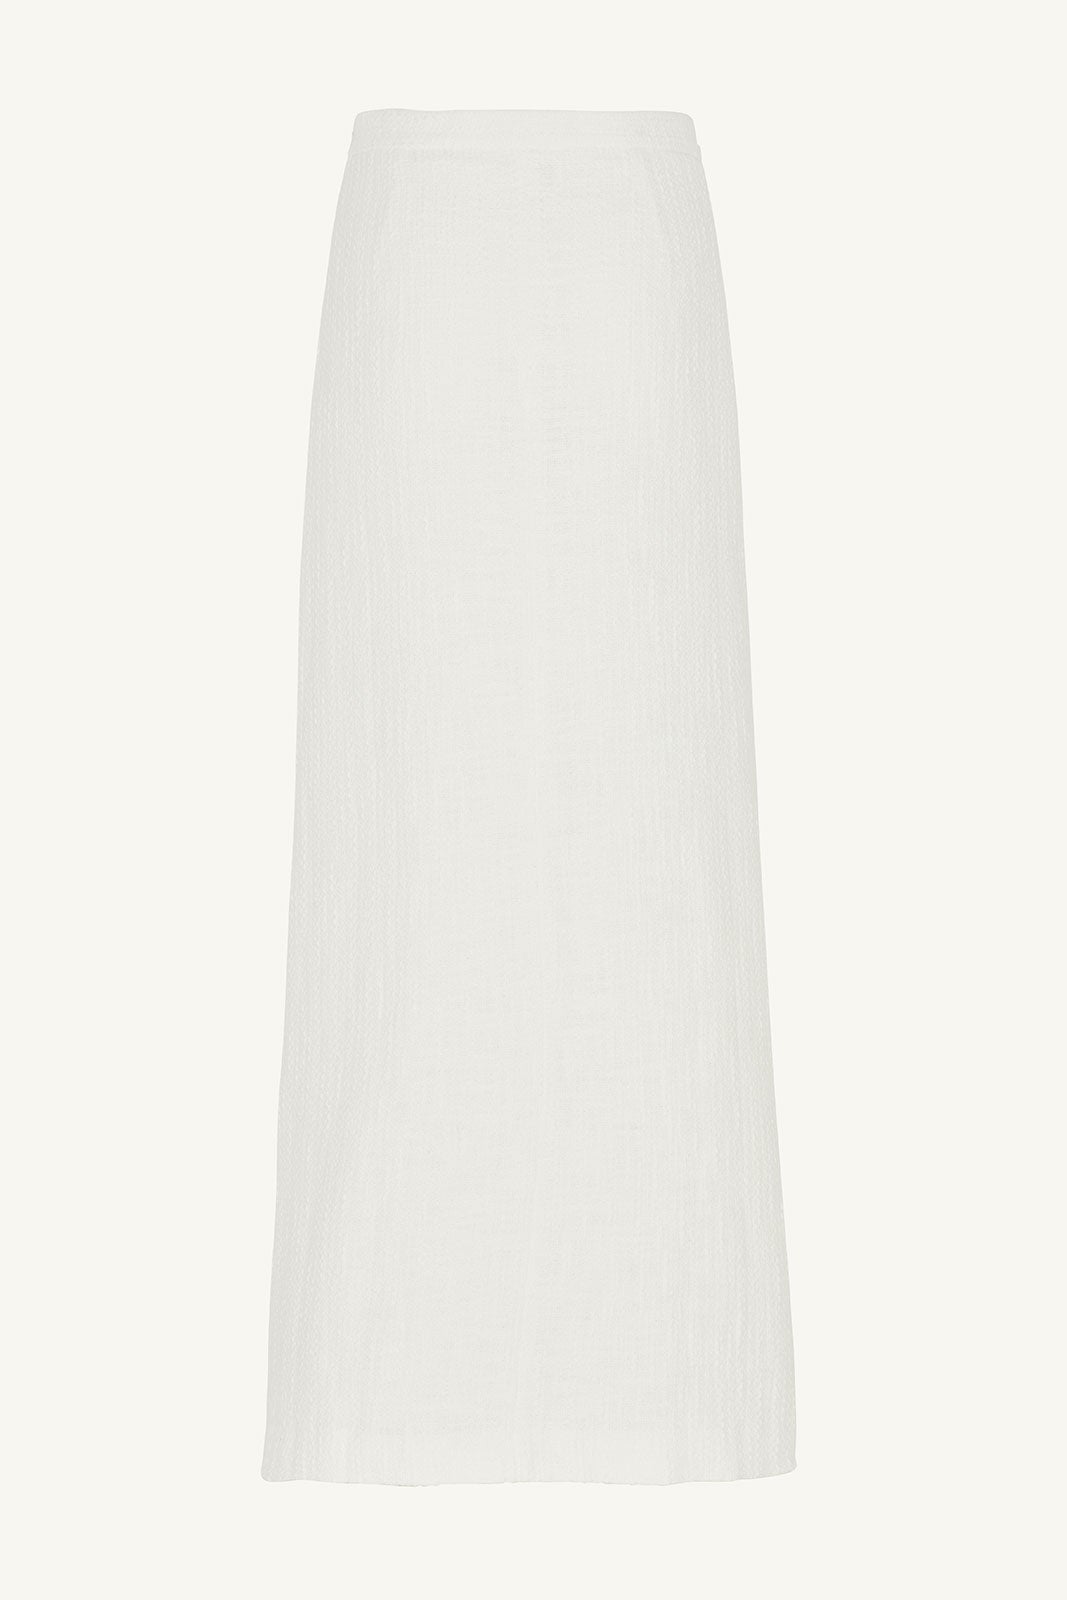 Sophia Tweed Button Front Maxi Skirt - Pearl Clothing epschoolboard 